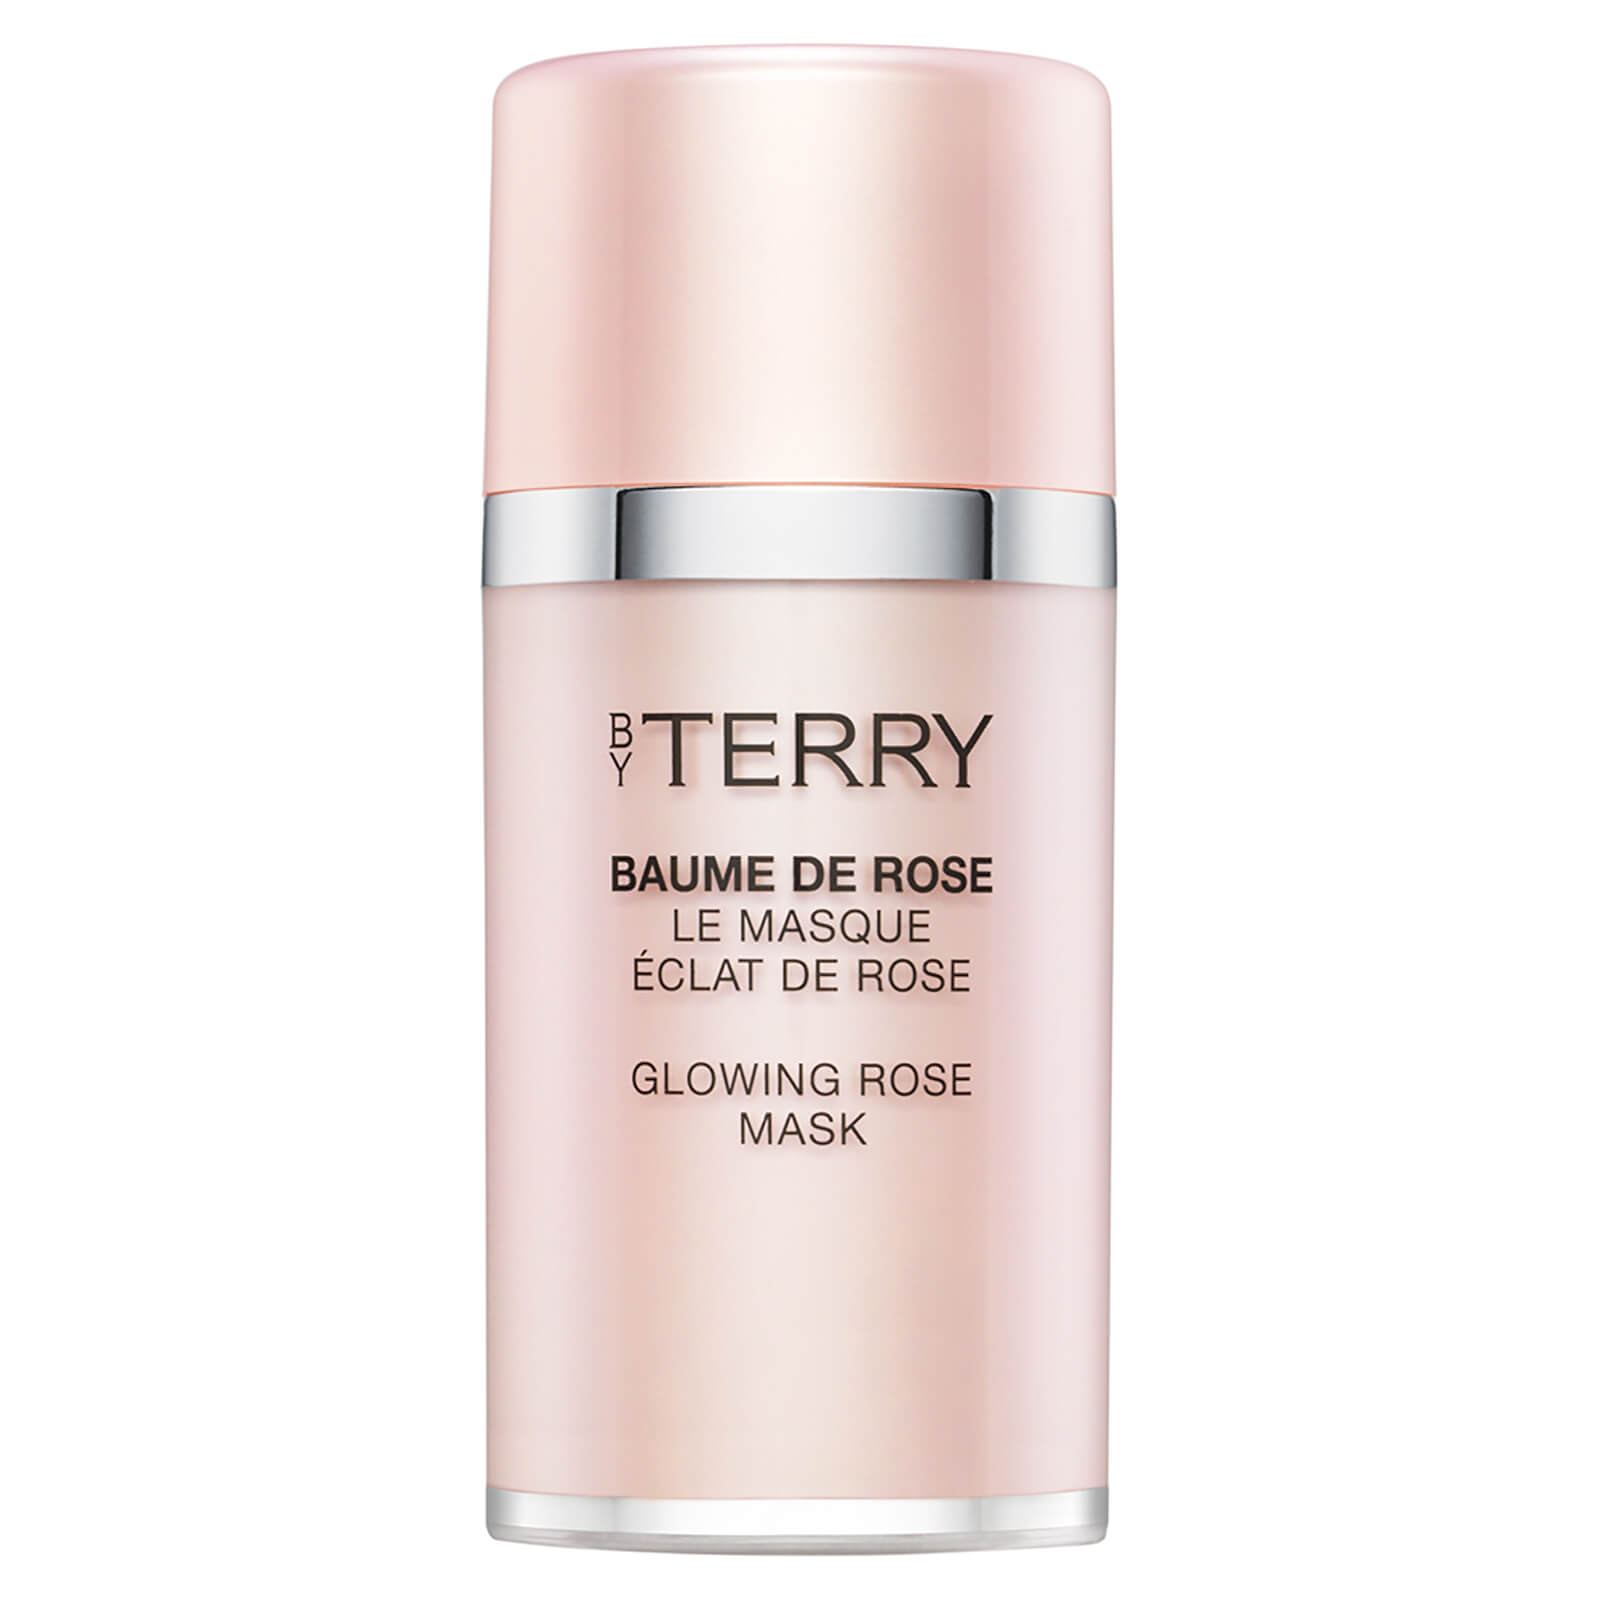 BY TERRY BAUME DE ROSE GLOWING MASK 50G,V20300013